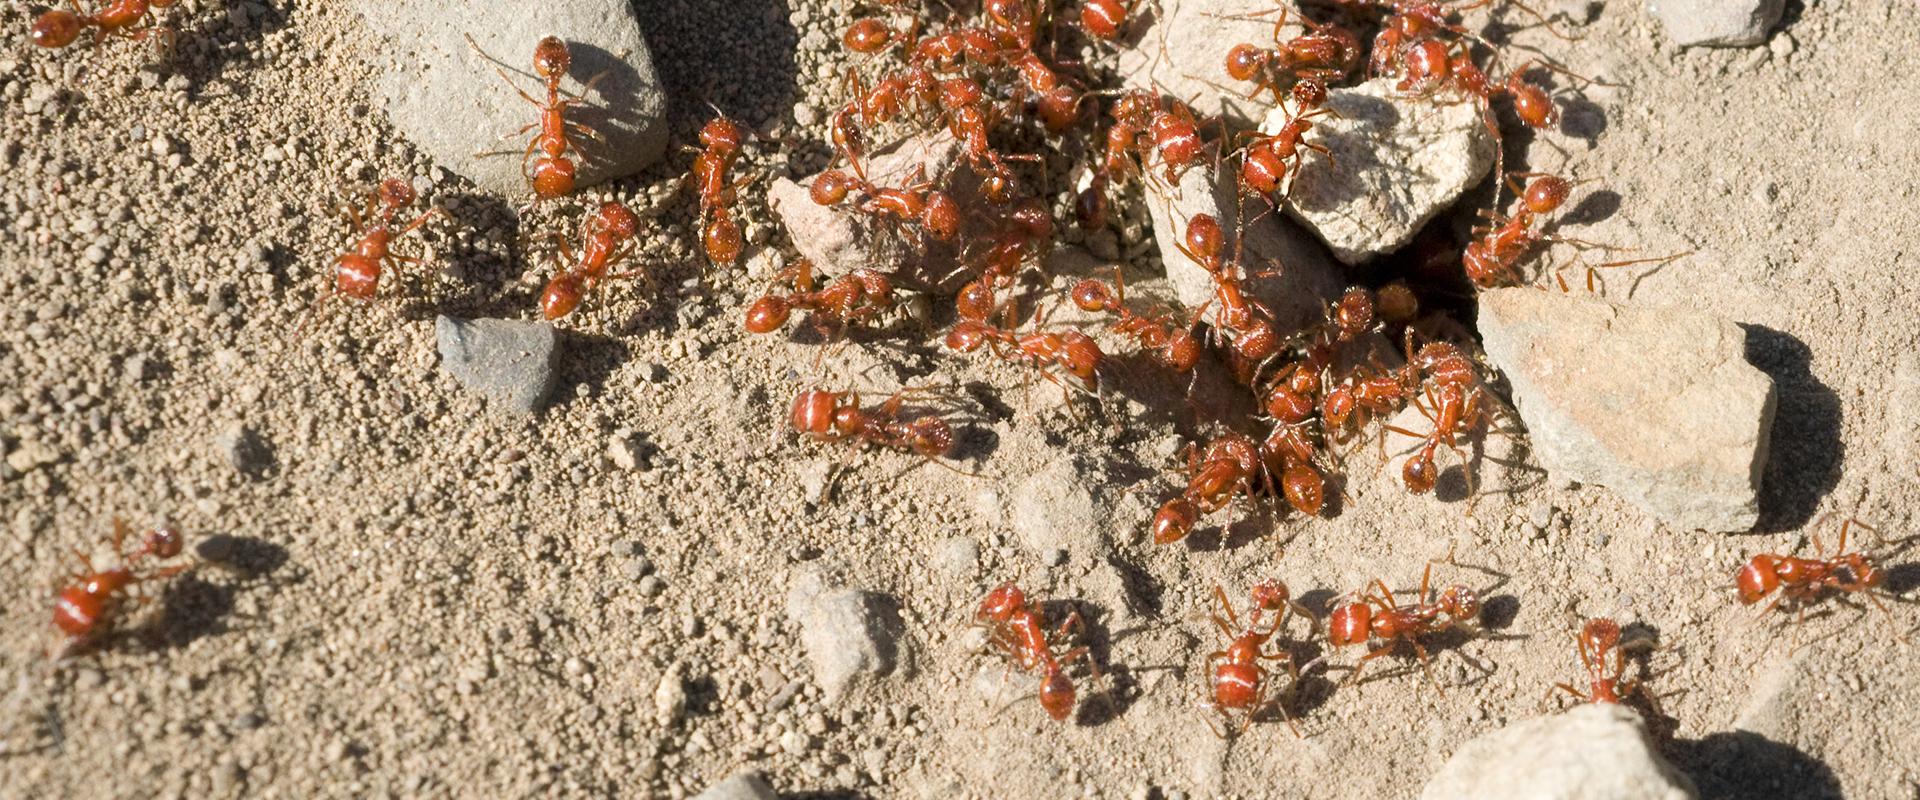 fire ants in dirt in oklahoma city